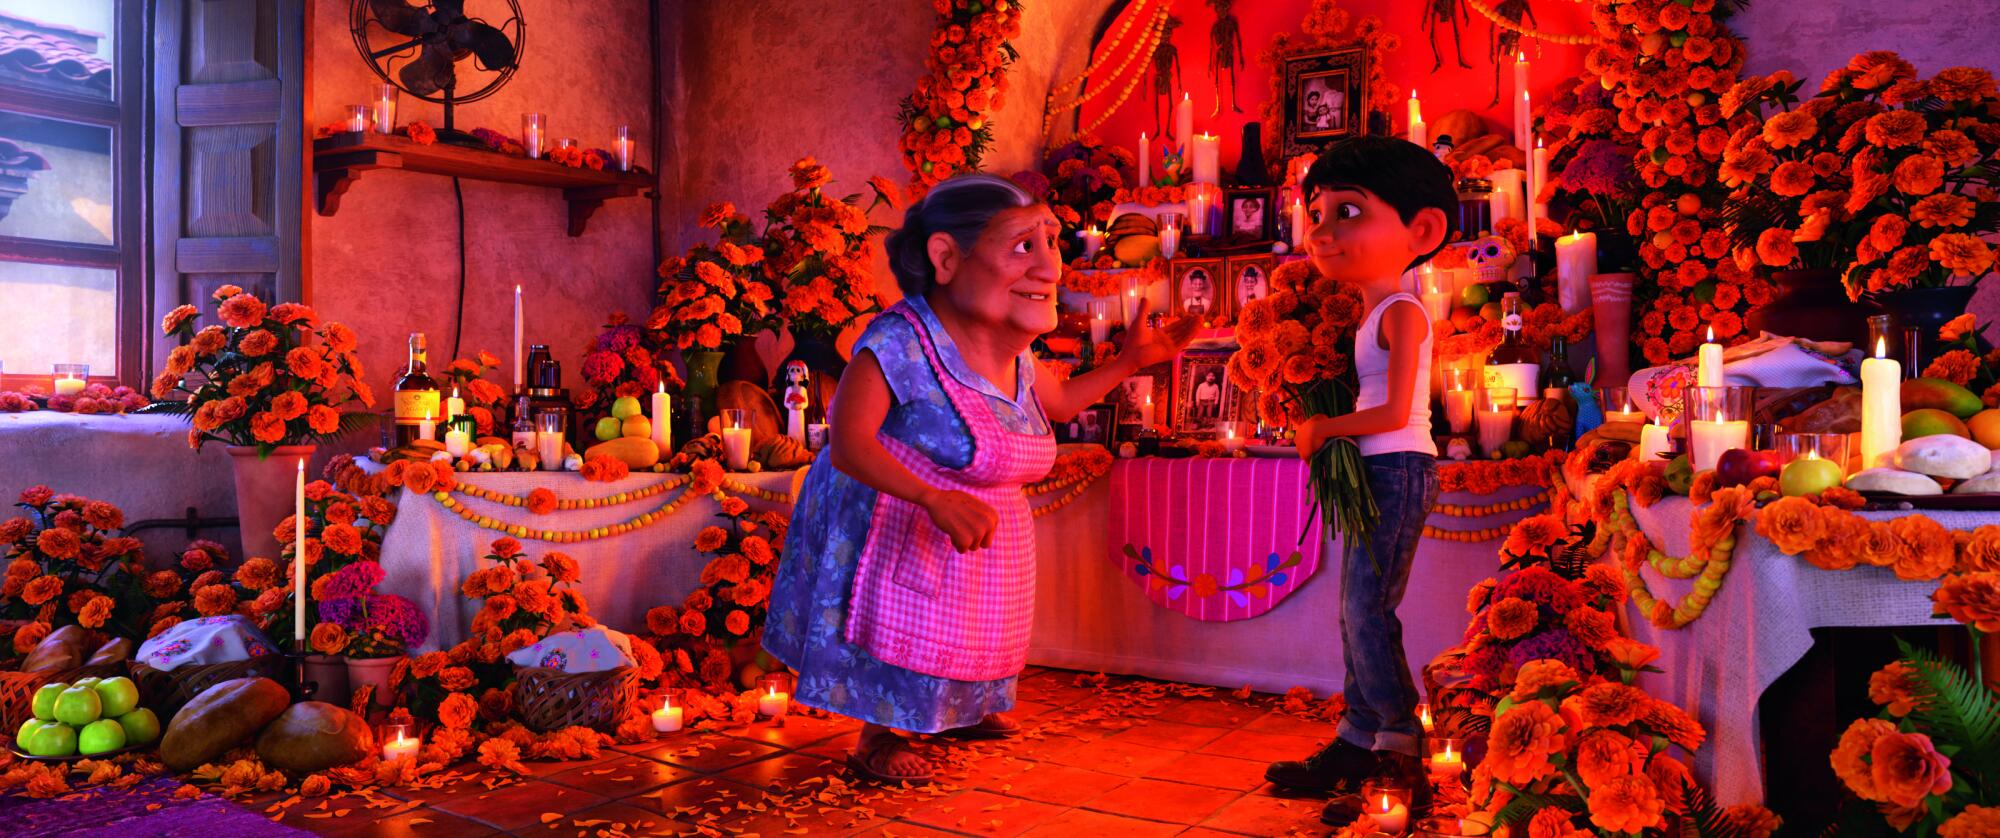  In "Coco," animated characters Abuelita and Miguel stand before their family altar for Dia de Muertos.